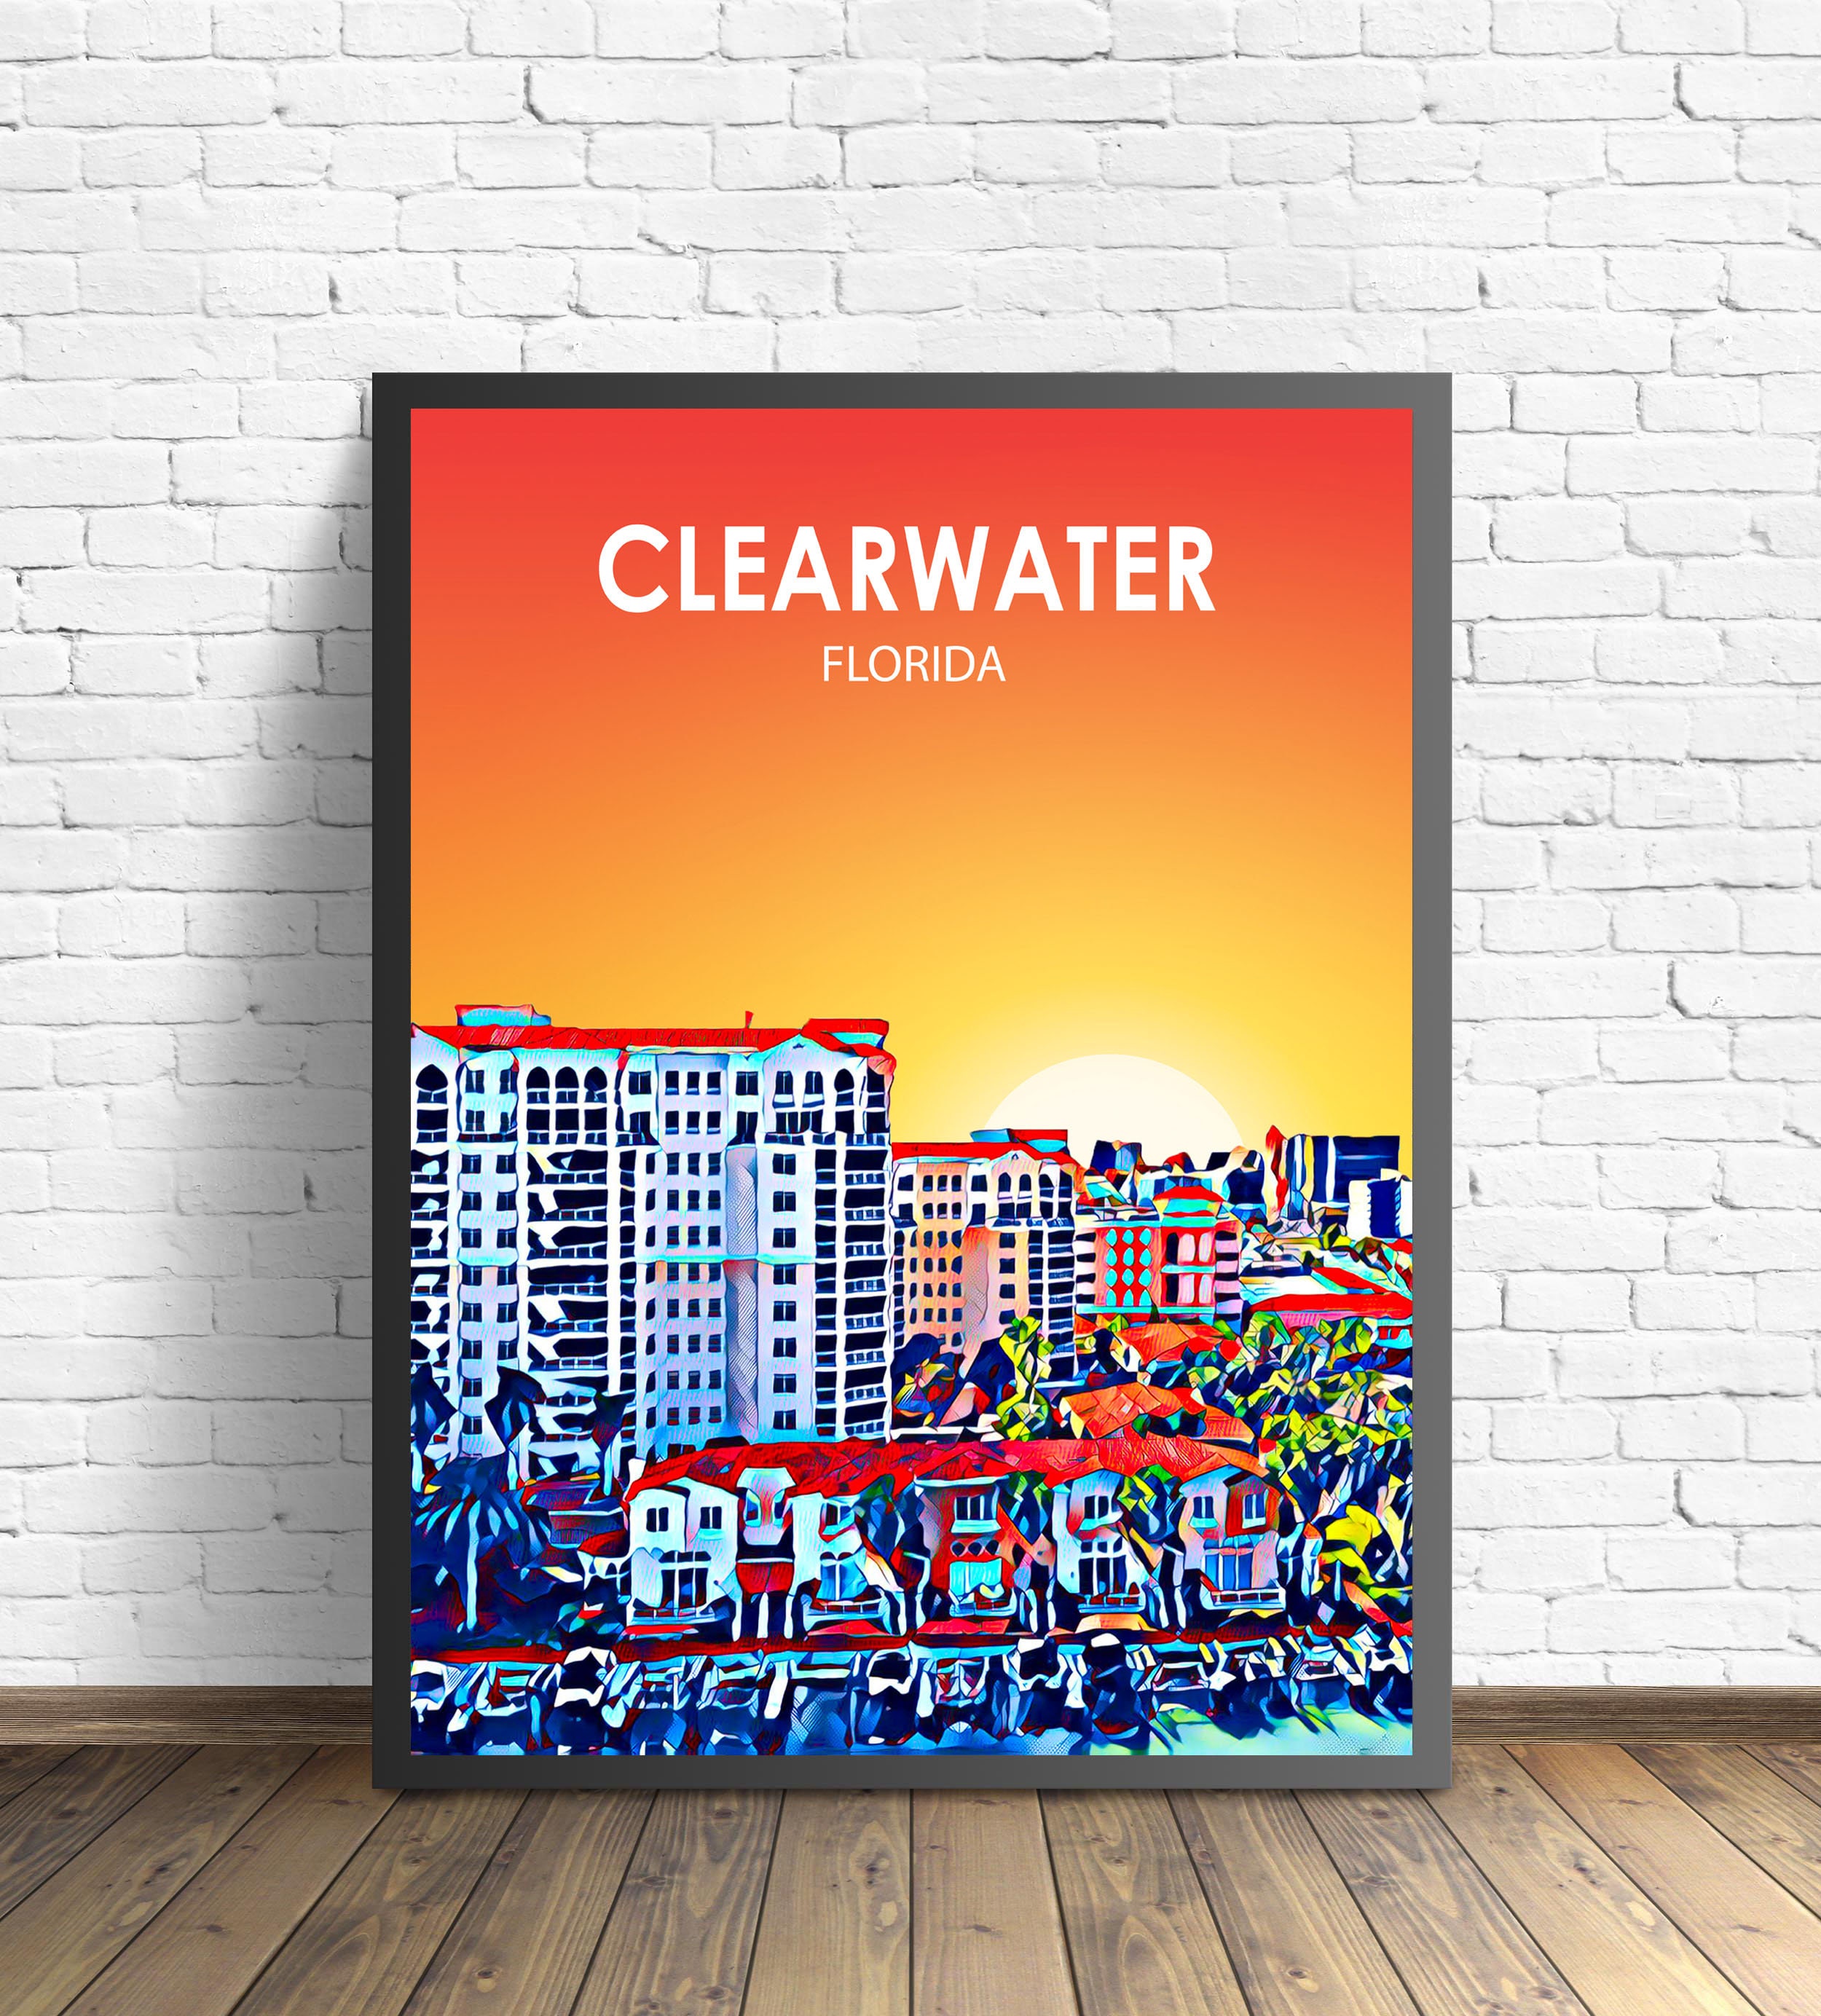 Clearwater Florida Art Poster Sunset / Night Landscape Poster